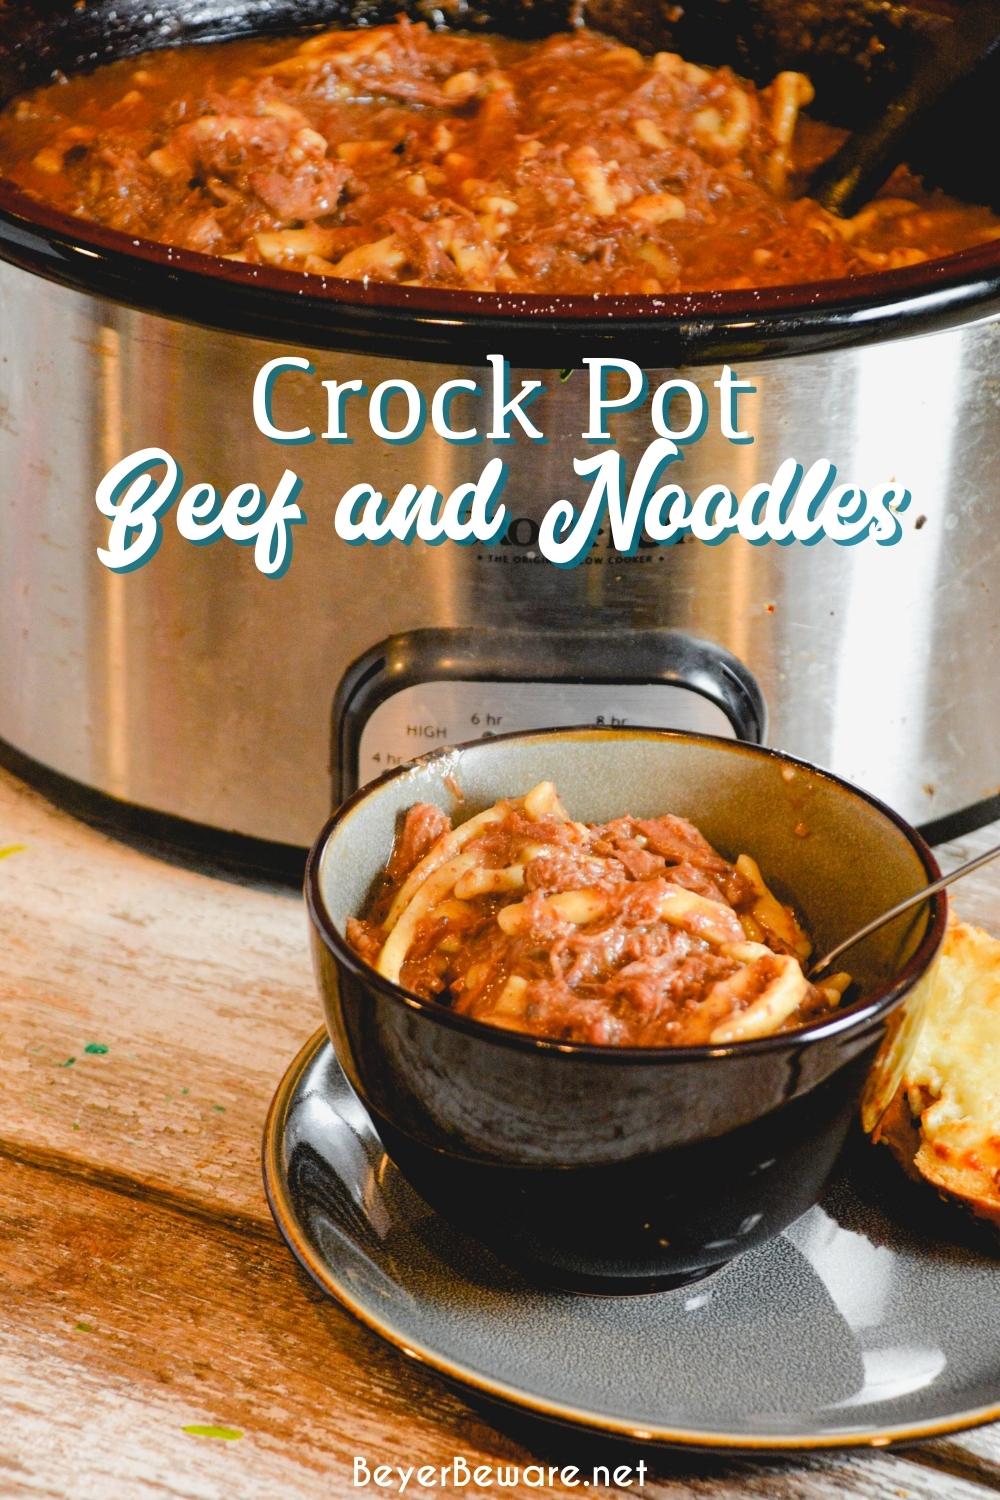 Crock pot beef and noodles made with an arm roast or rump roast and beer, cream of mushroom soup, onion soup mix, garlic, and egg noodles.